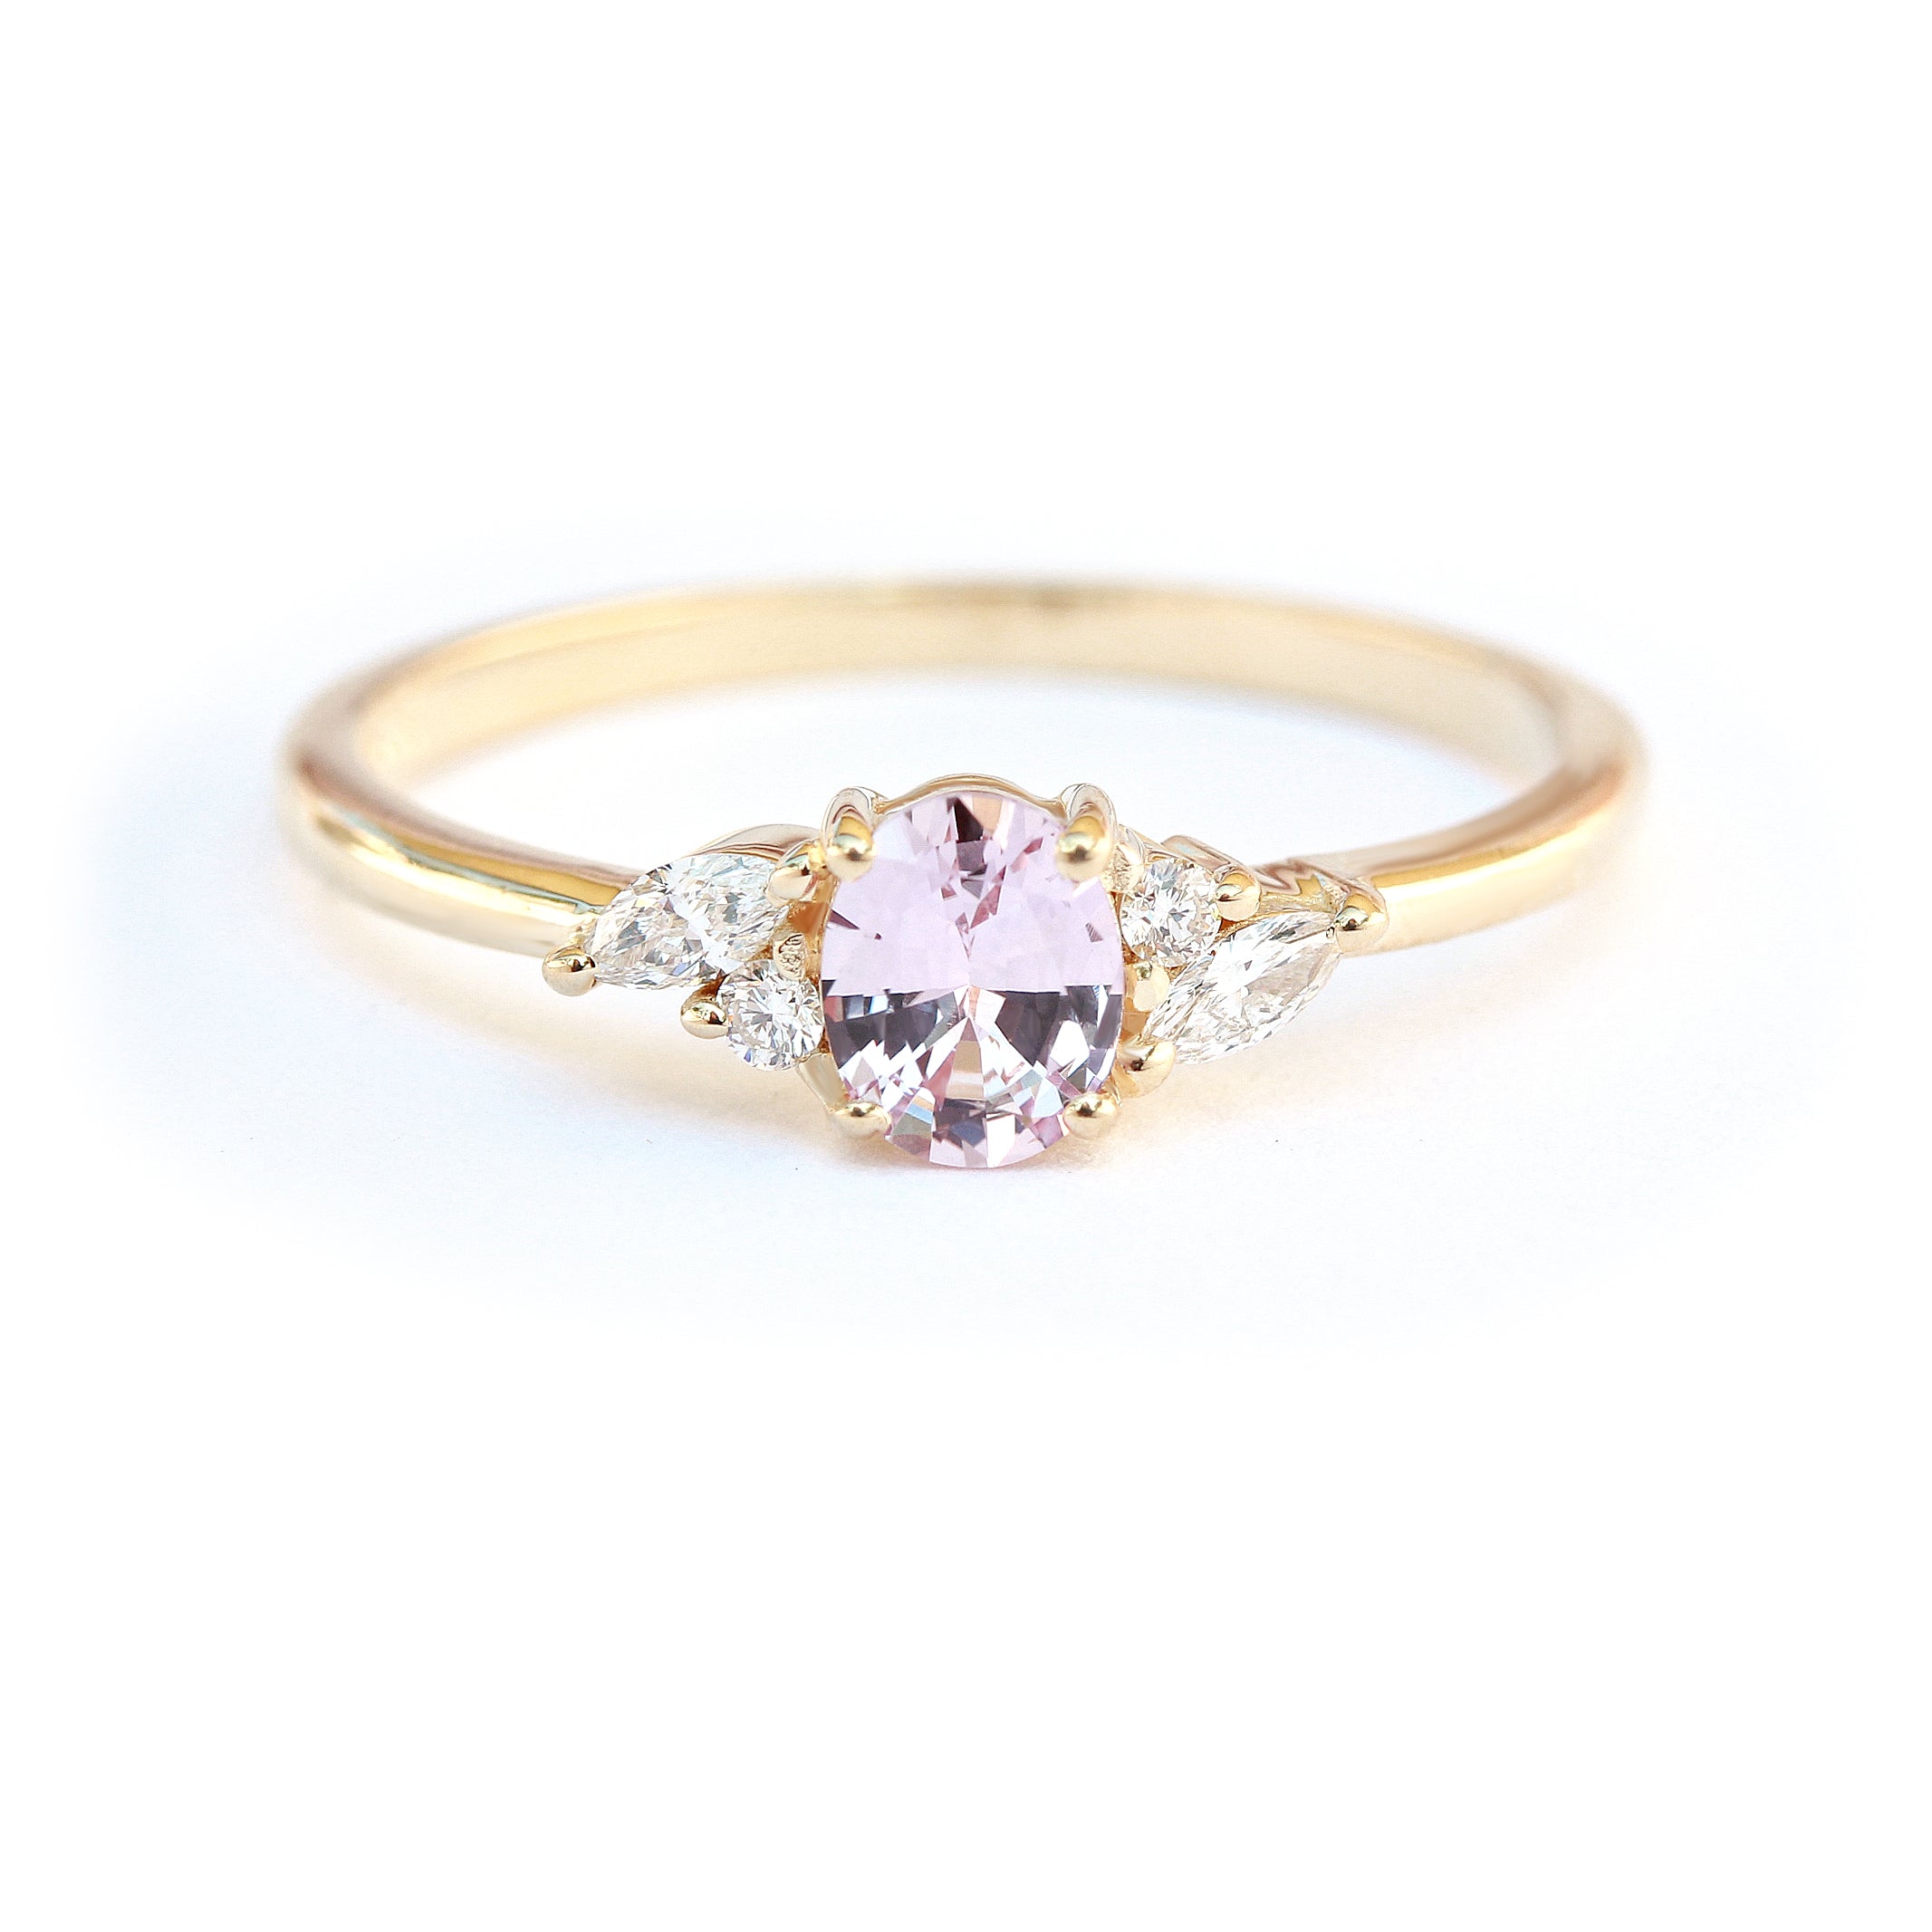 Oval pink sapphire & diamonds delicate engagement ring - Ella